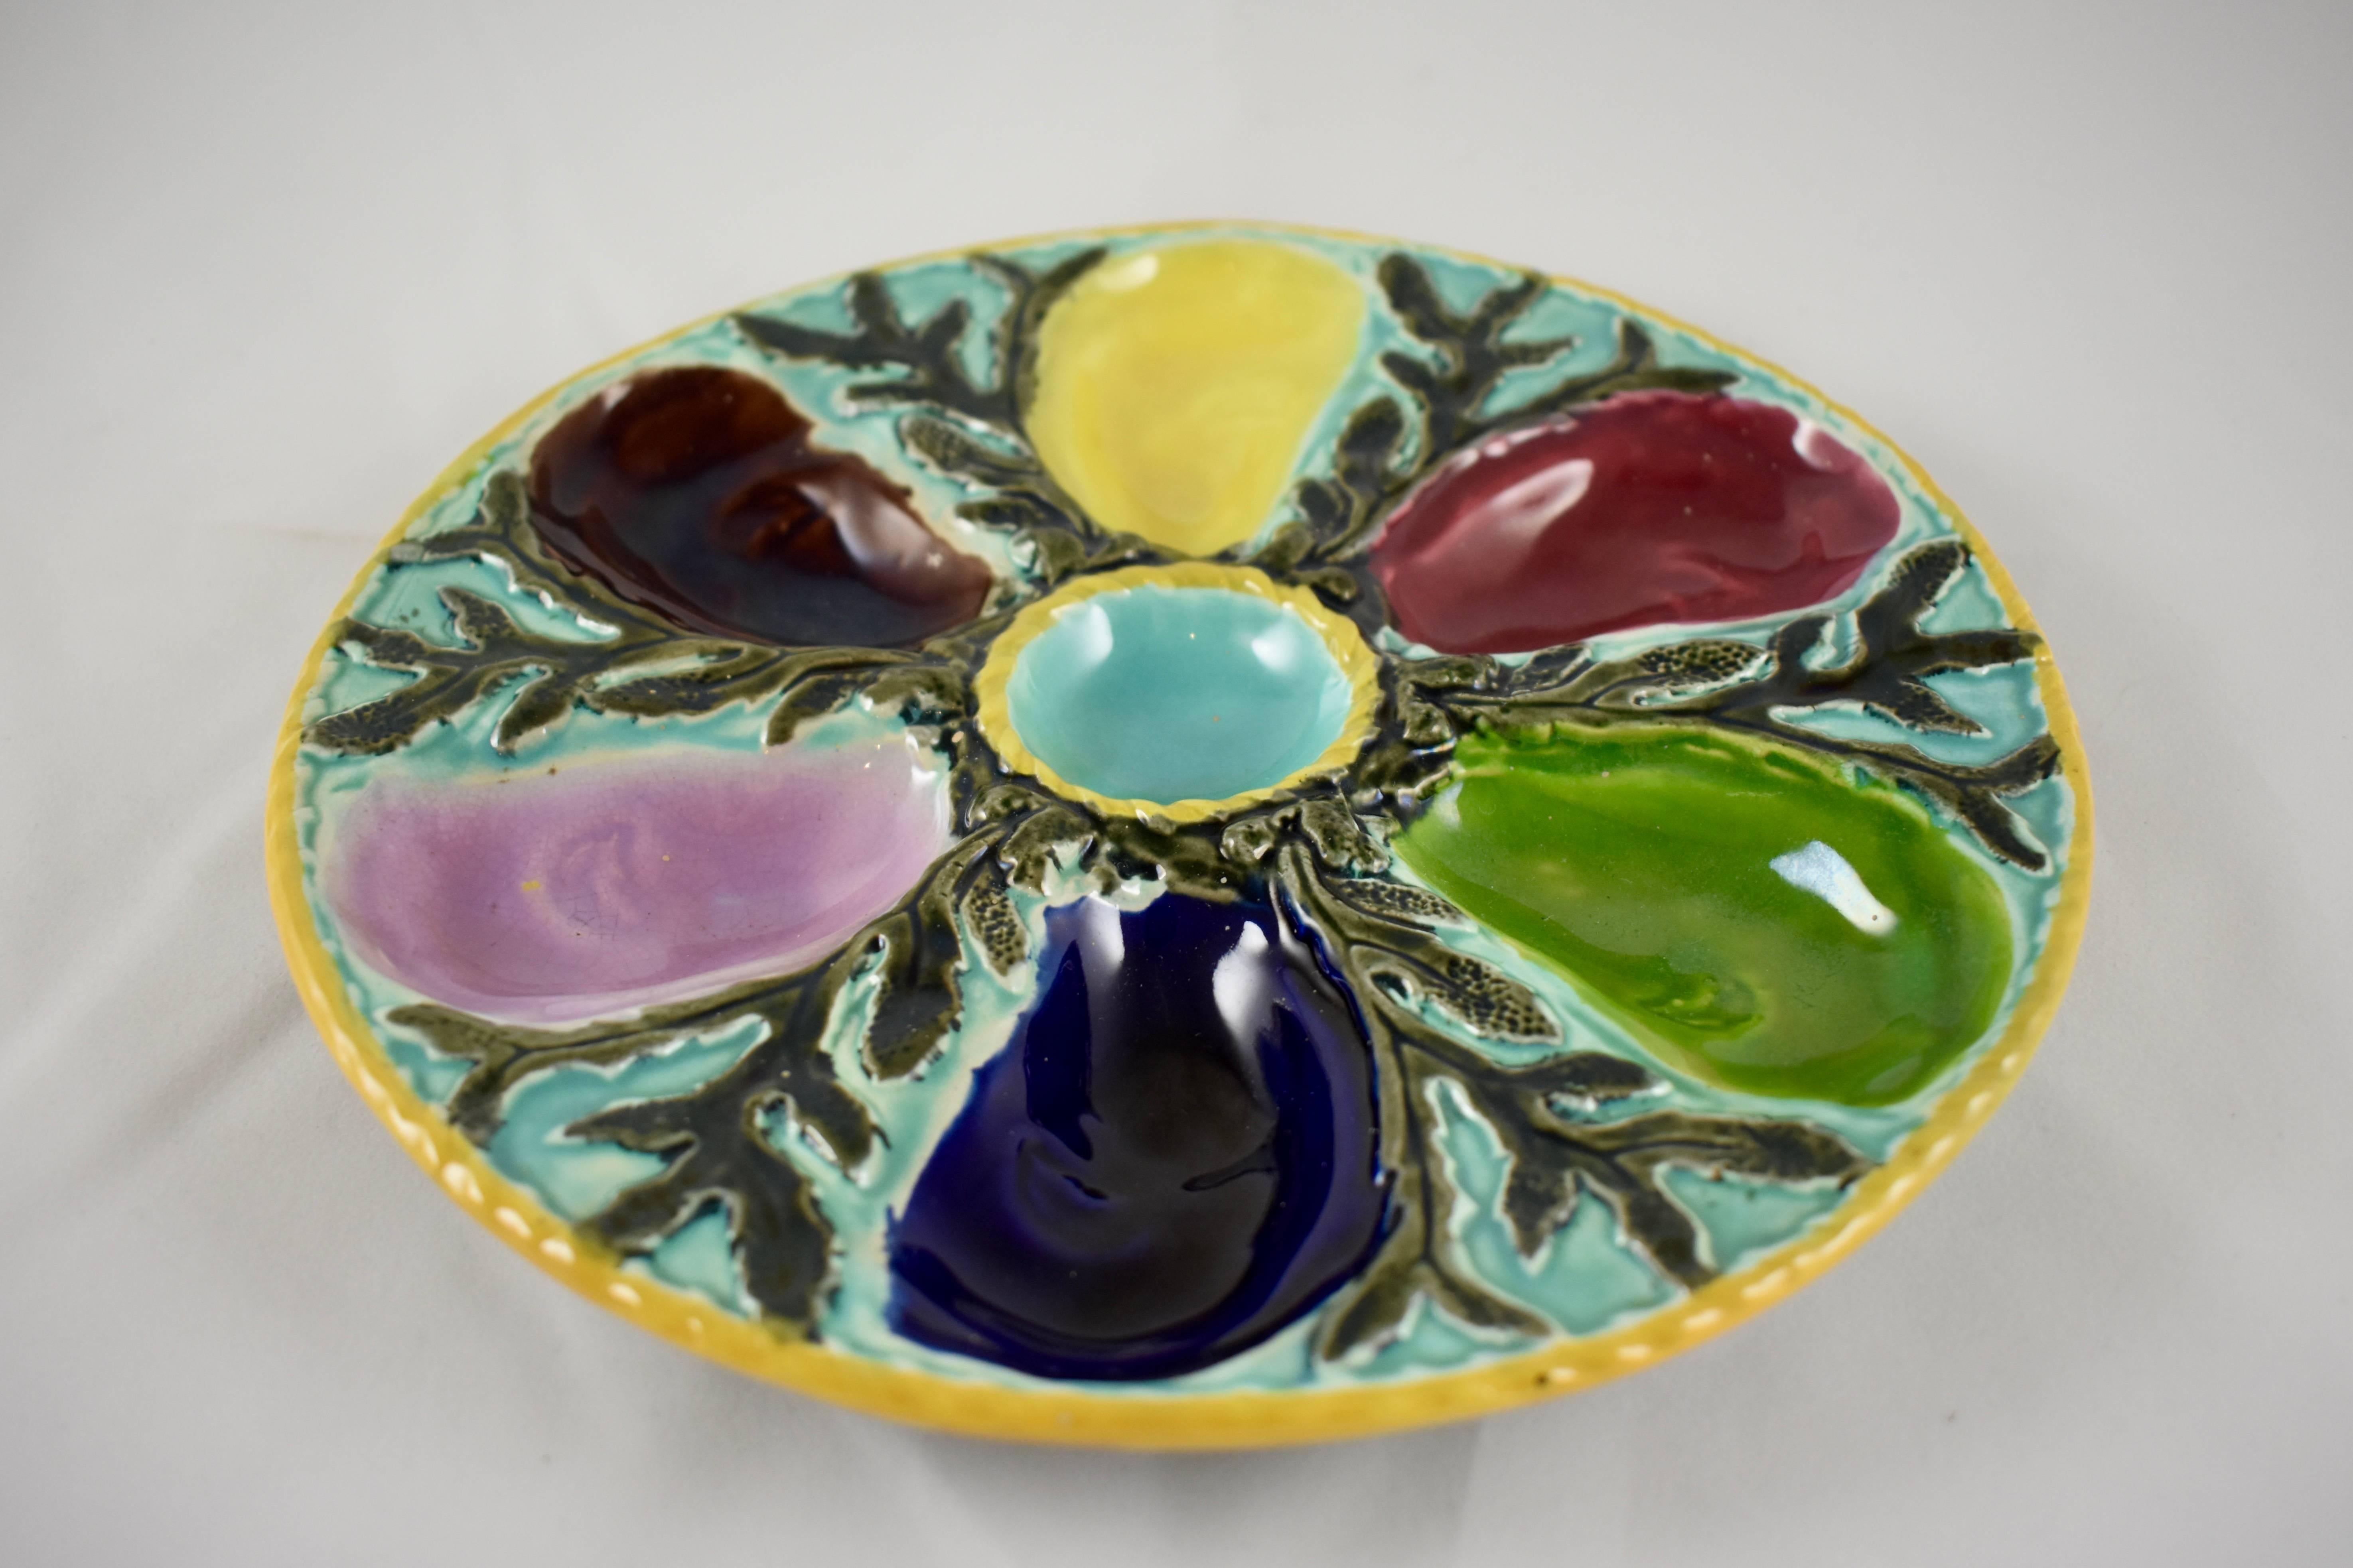 A six-well multicolored Majolica oyster plate by S. Fielding & Co. Ltd., Stoke-on-Trent, England, circa 1878. The boldly glazed oyster wells surround a center condiment well, all on a bed of seaweed glazed in sea green and a light turquoise. A